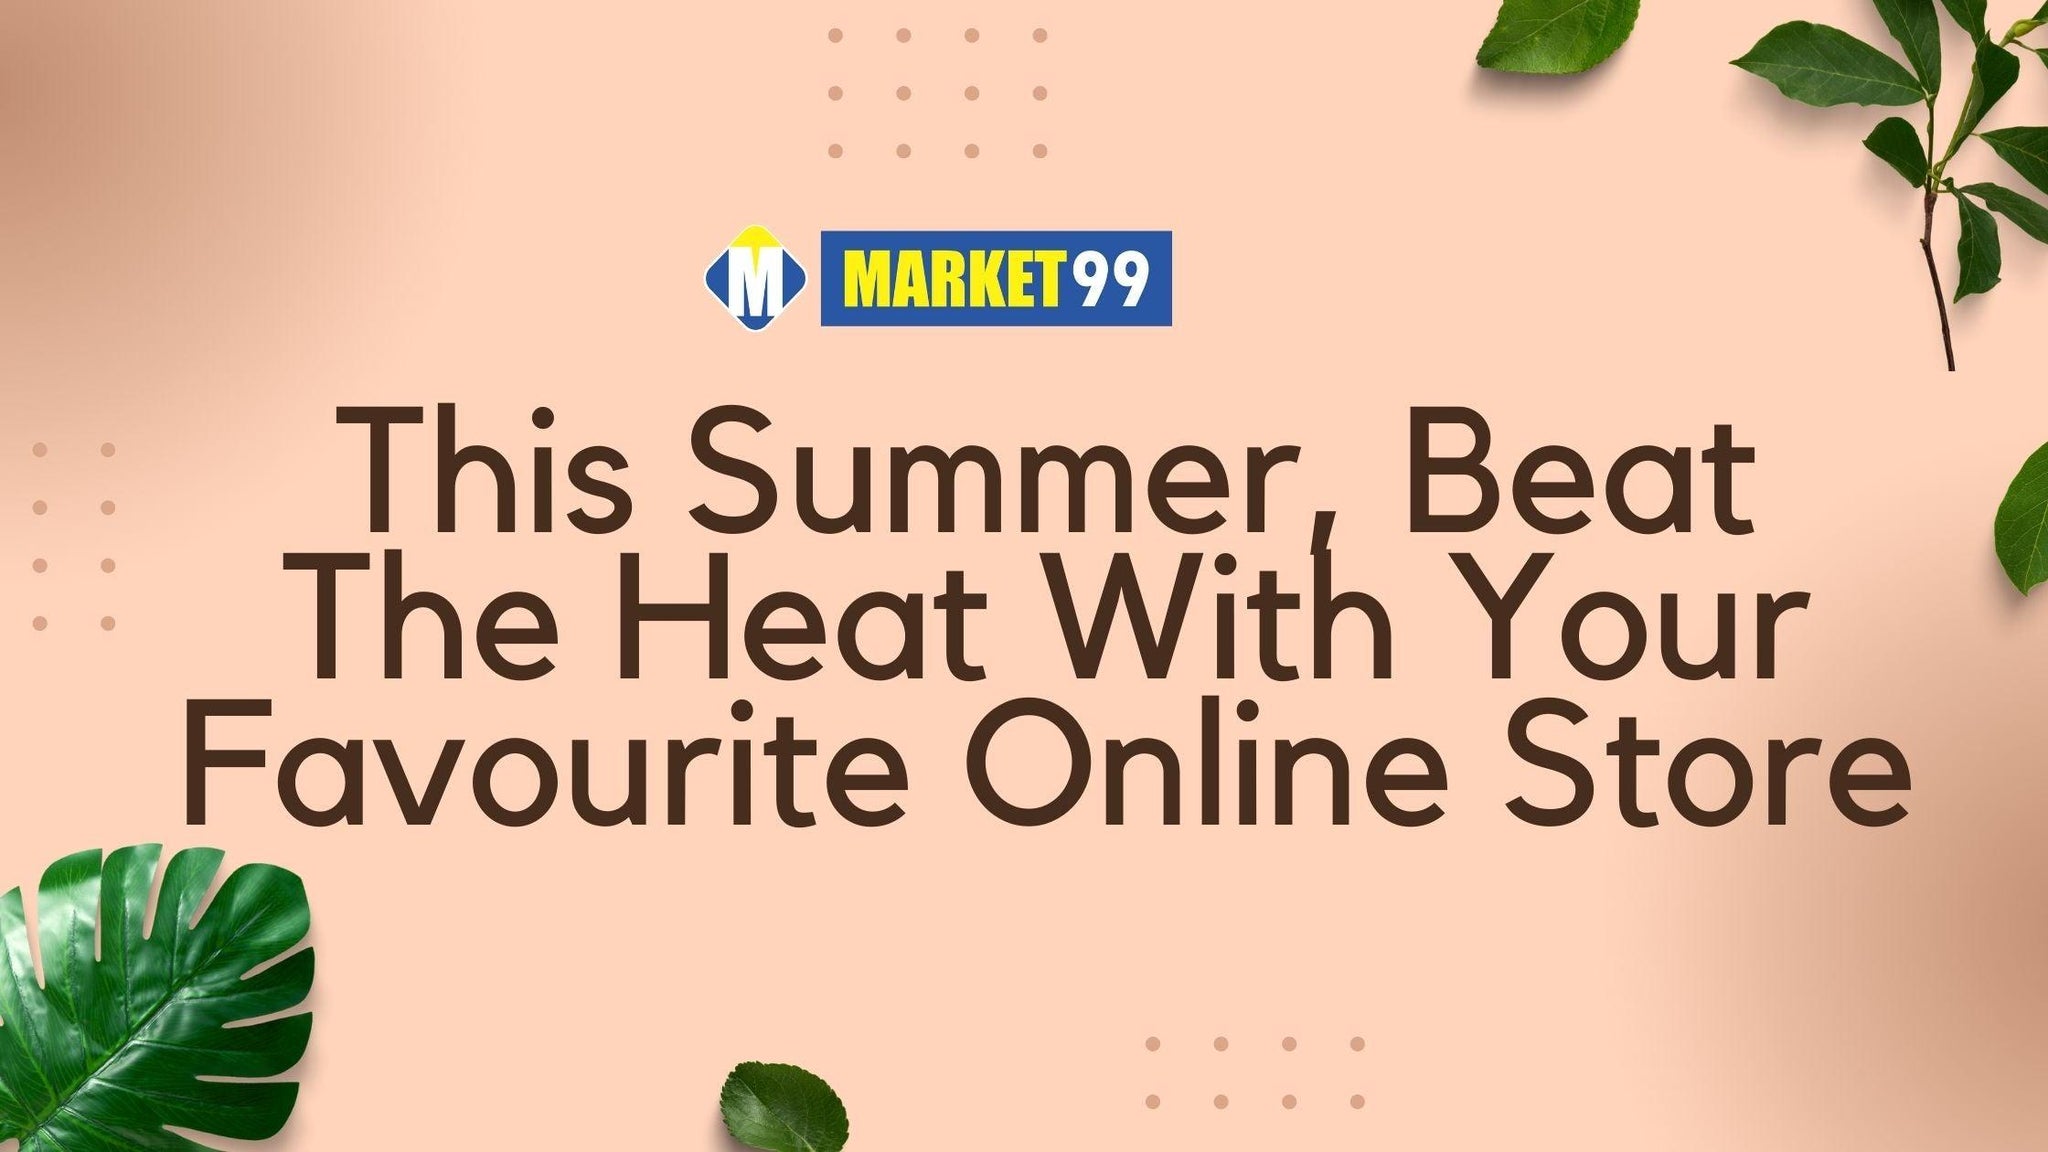 This Summer, Beat The Heat With Your Favourite Online Store - MARKET 99